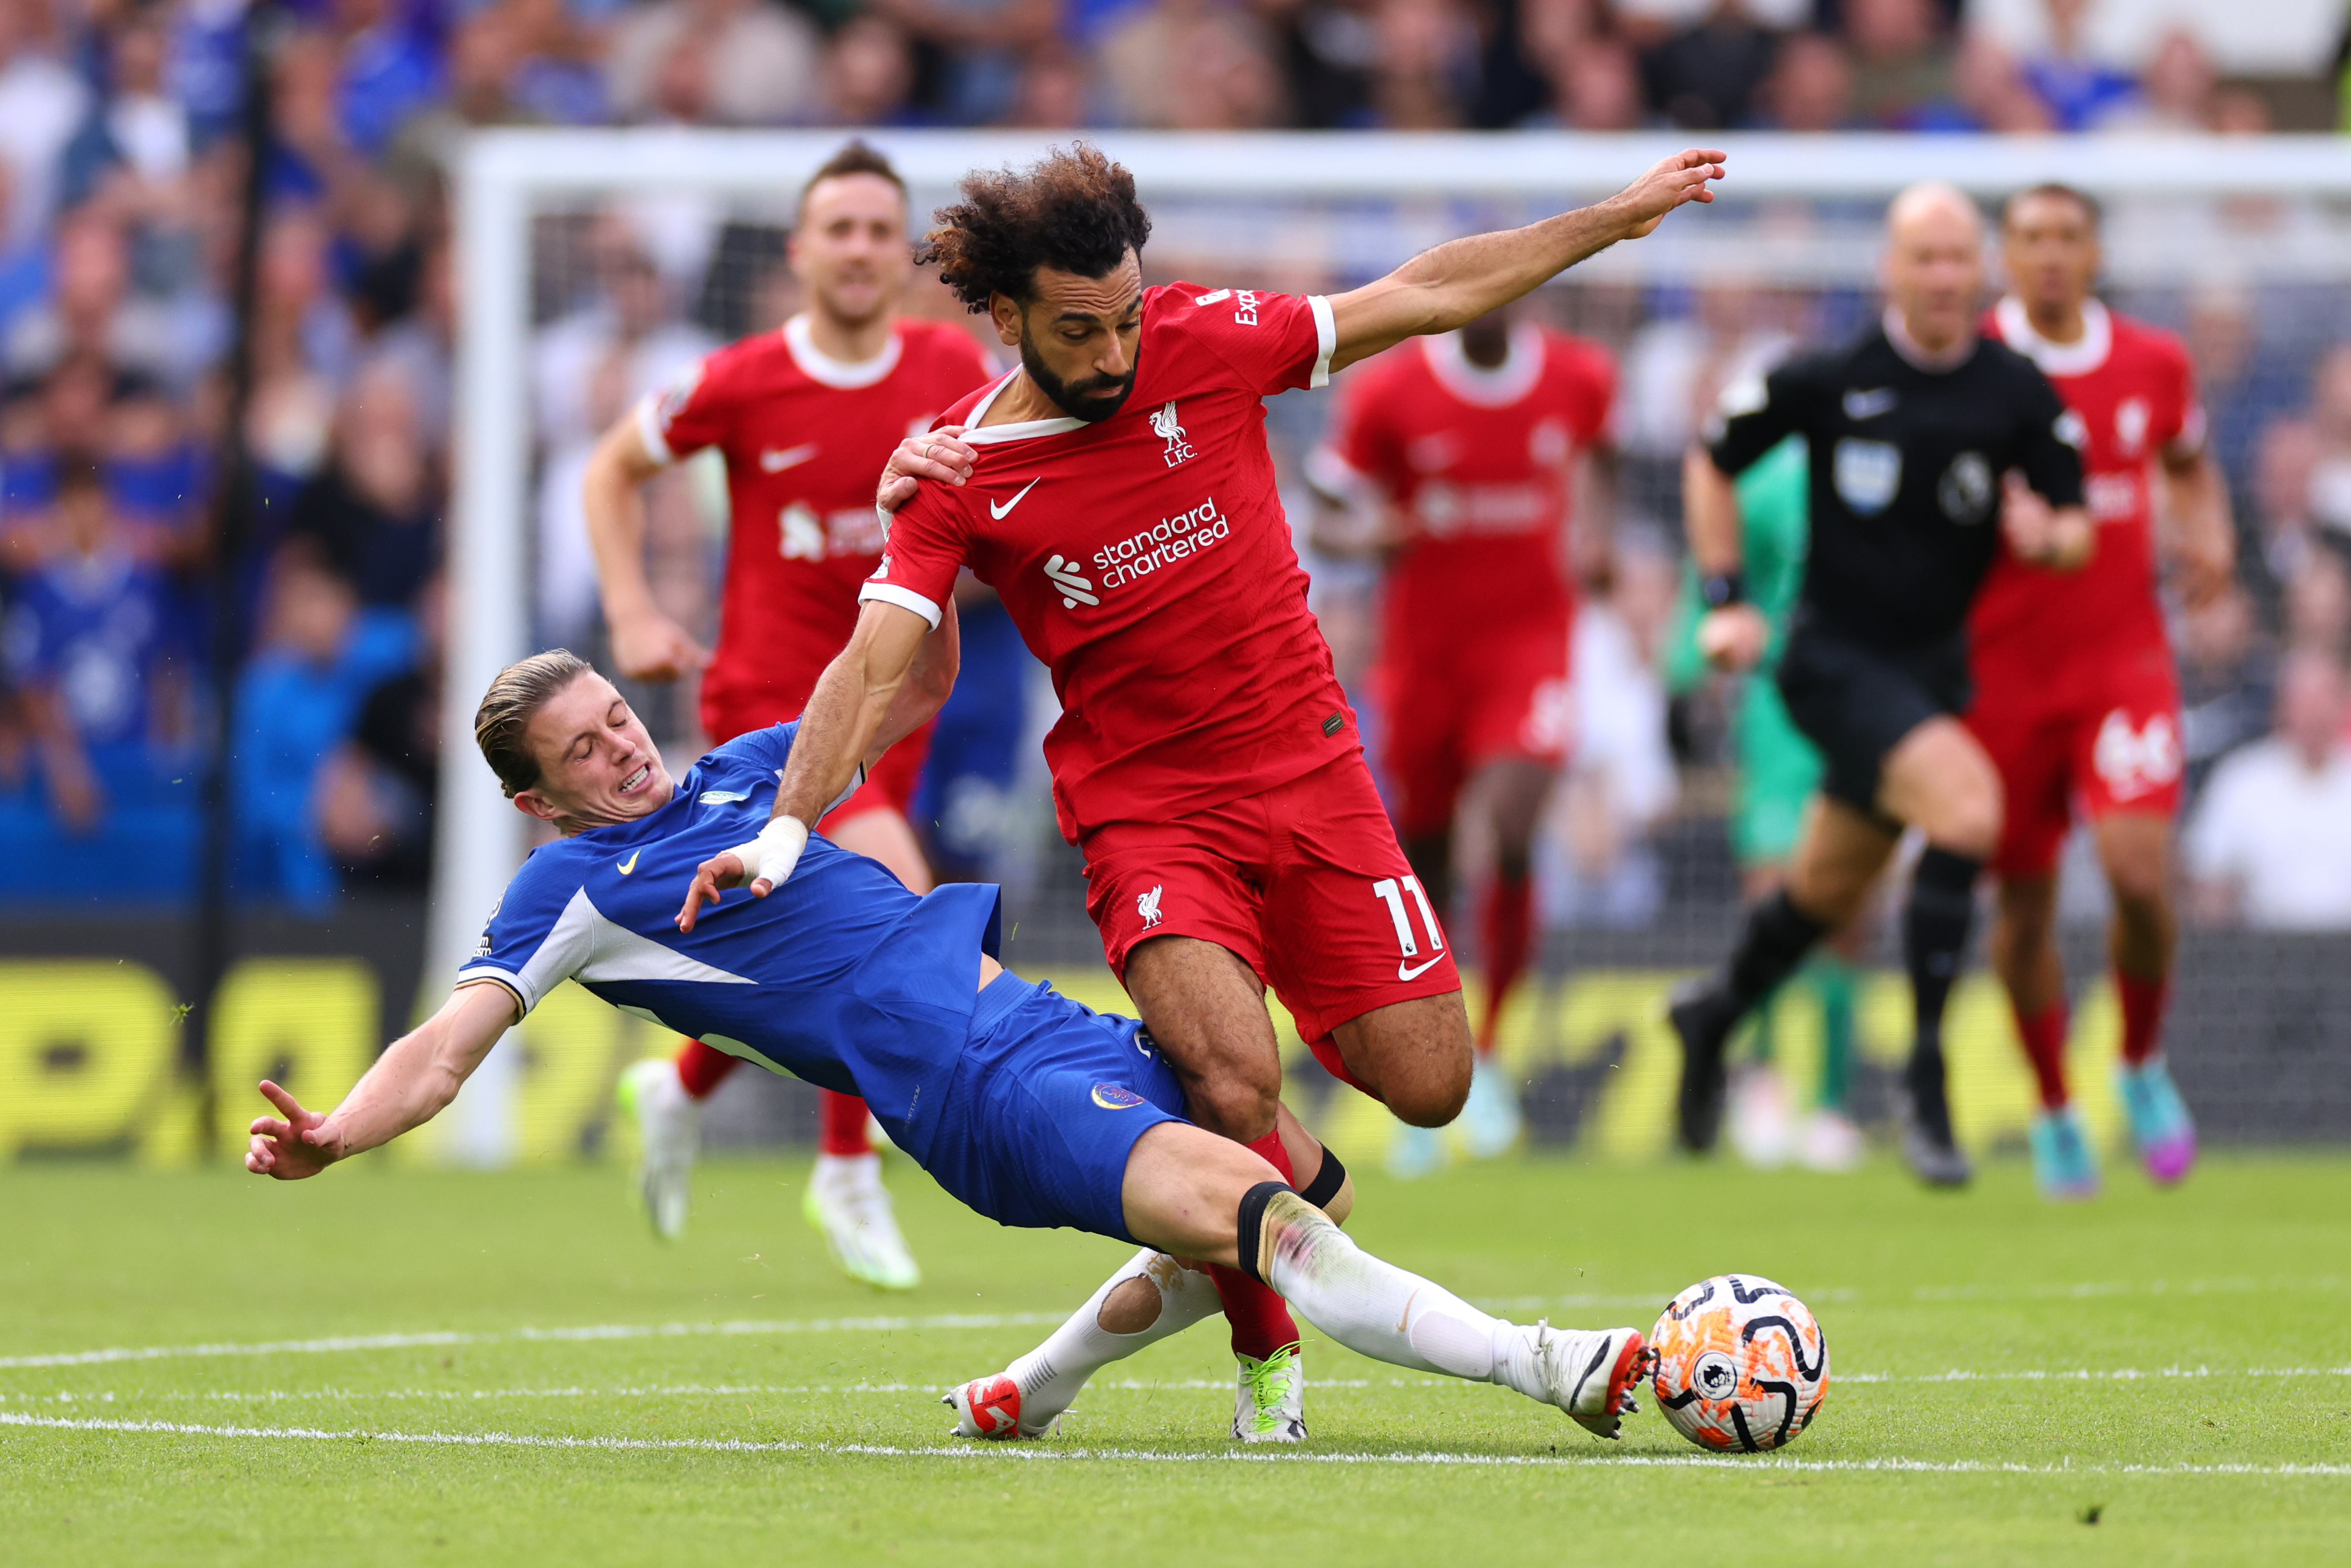 Mohamed Salah in action with Conor Gallagher - Chelsea FC v Liverpool FC - Premier League